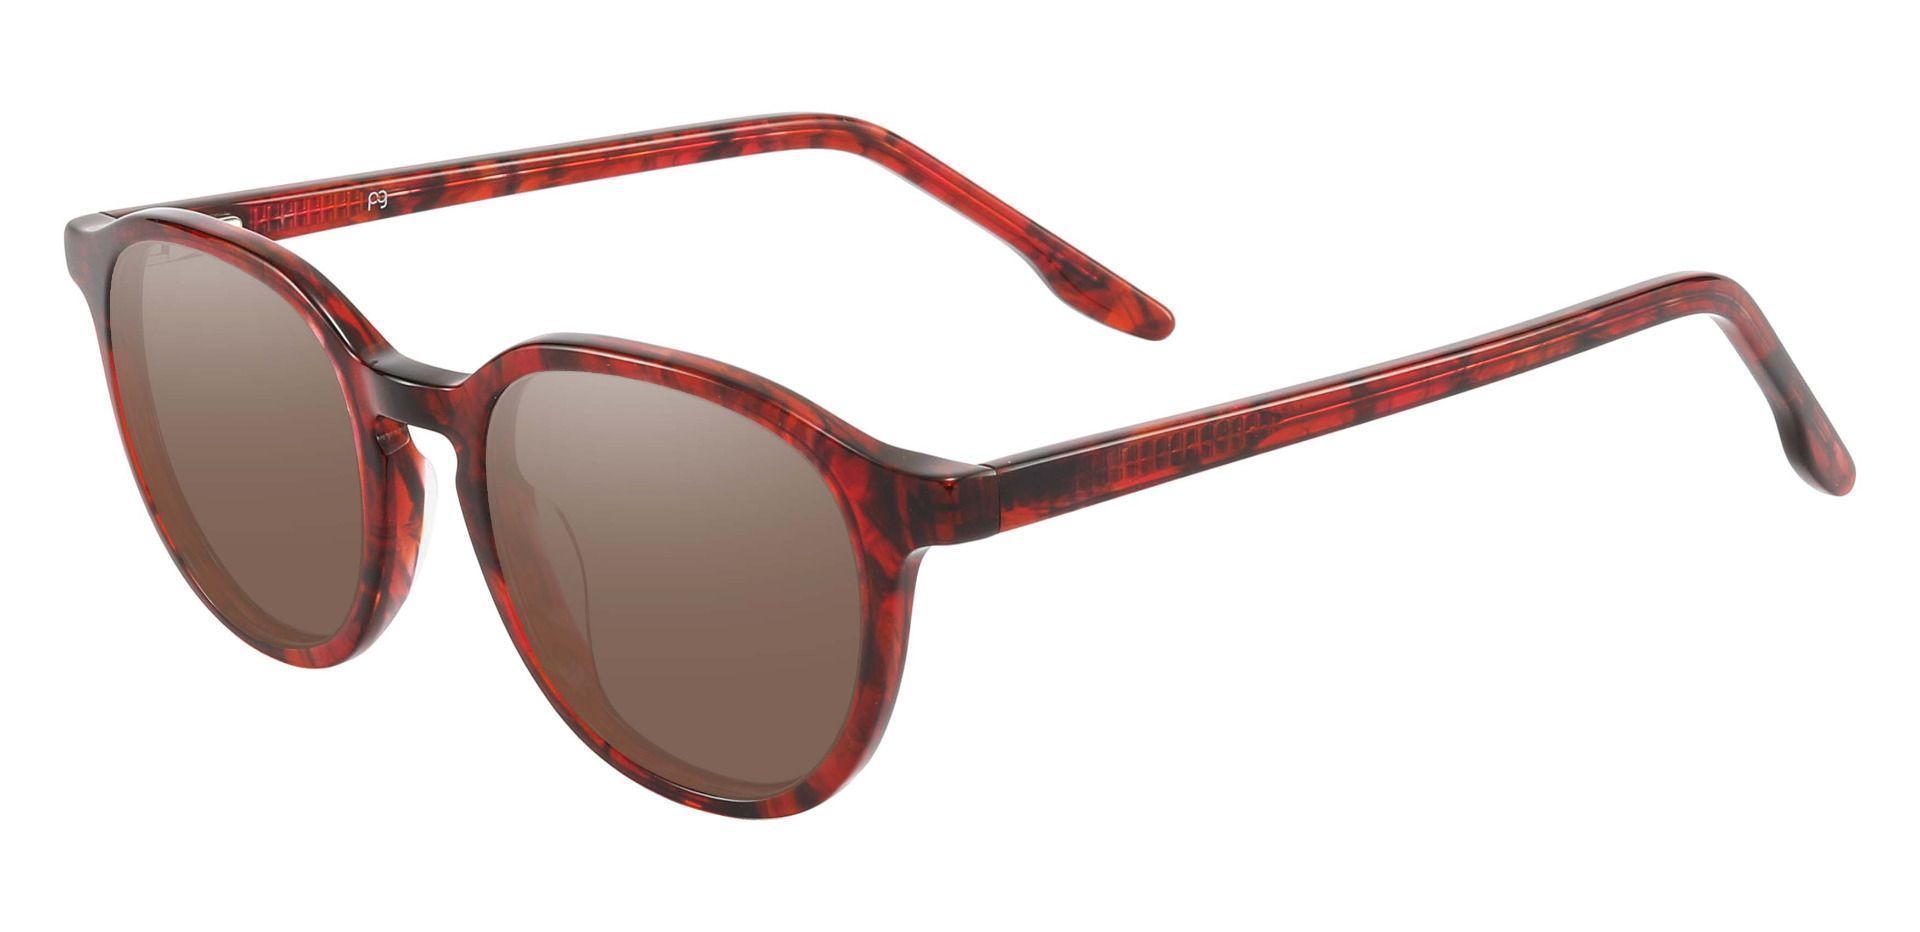 Ashley Oval Prescription Sunglasses - Red Frame With Brown Lenses